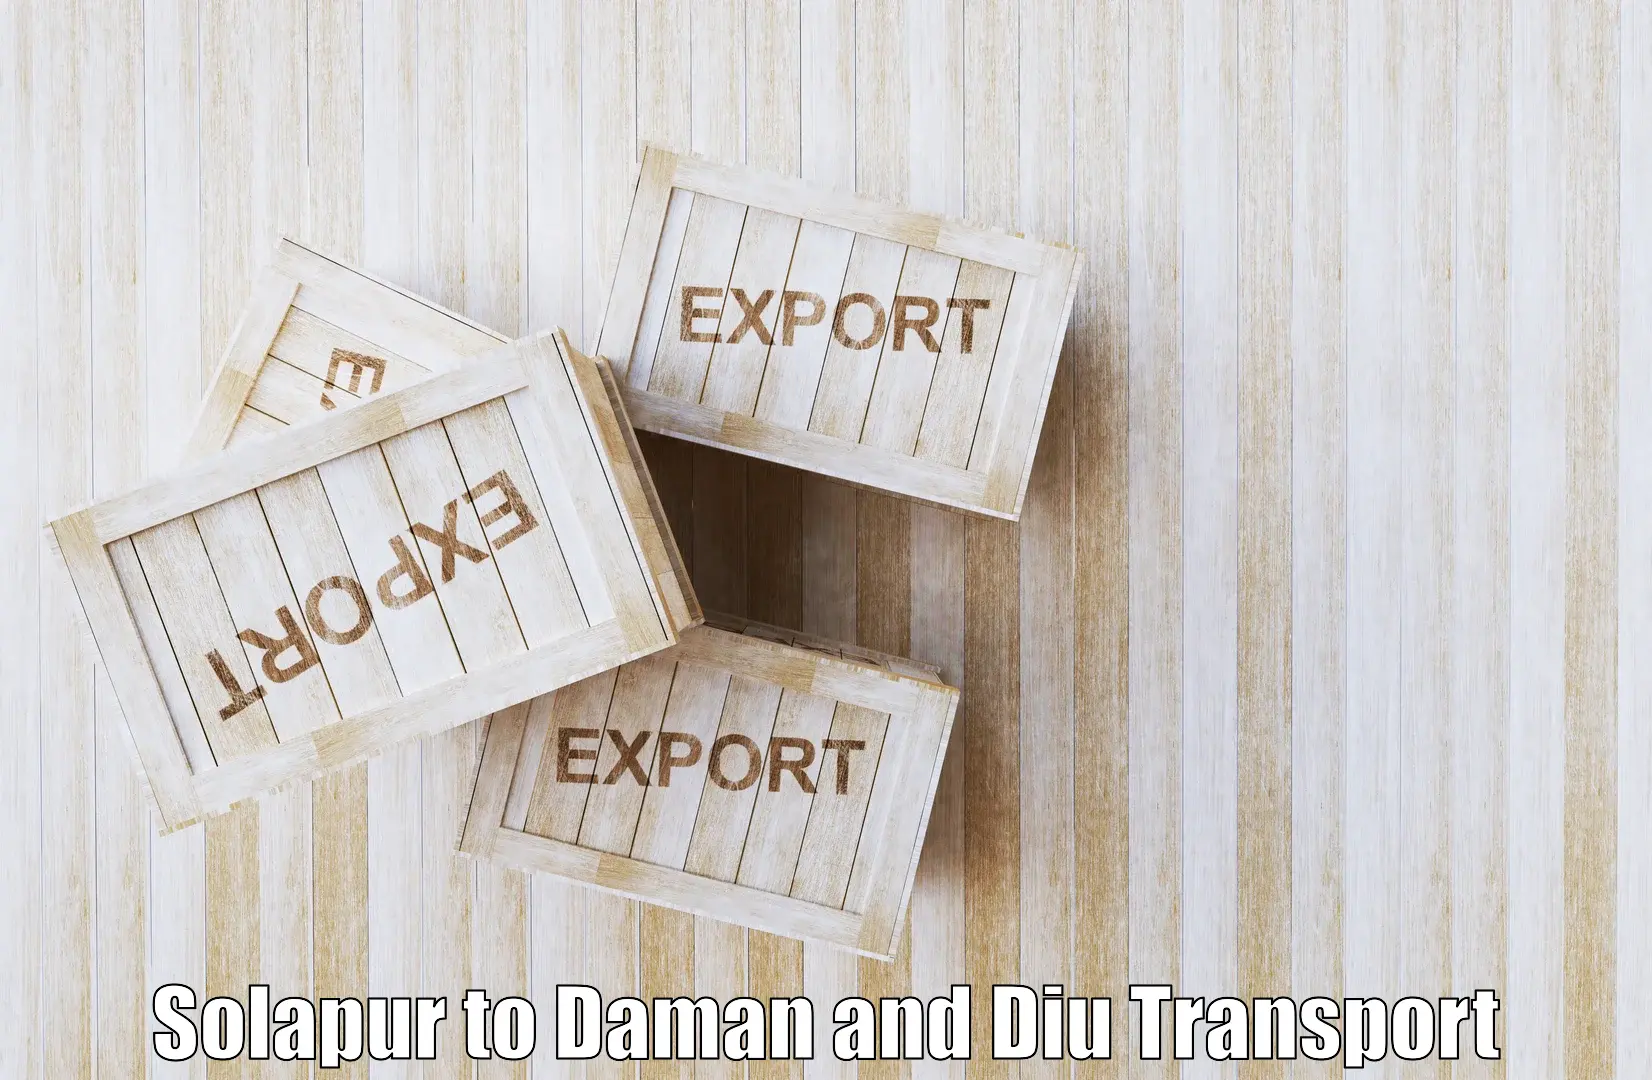 Transport shared services Solapur to Diu